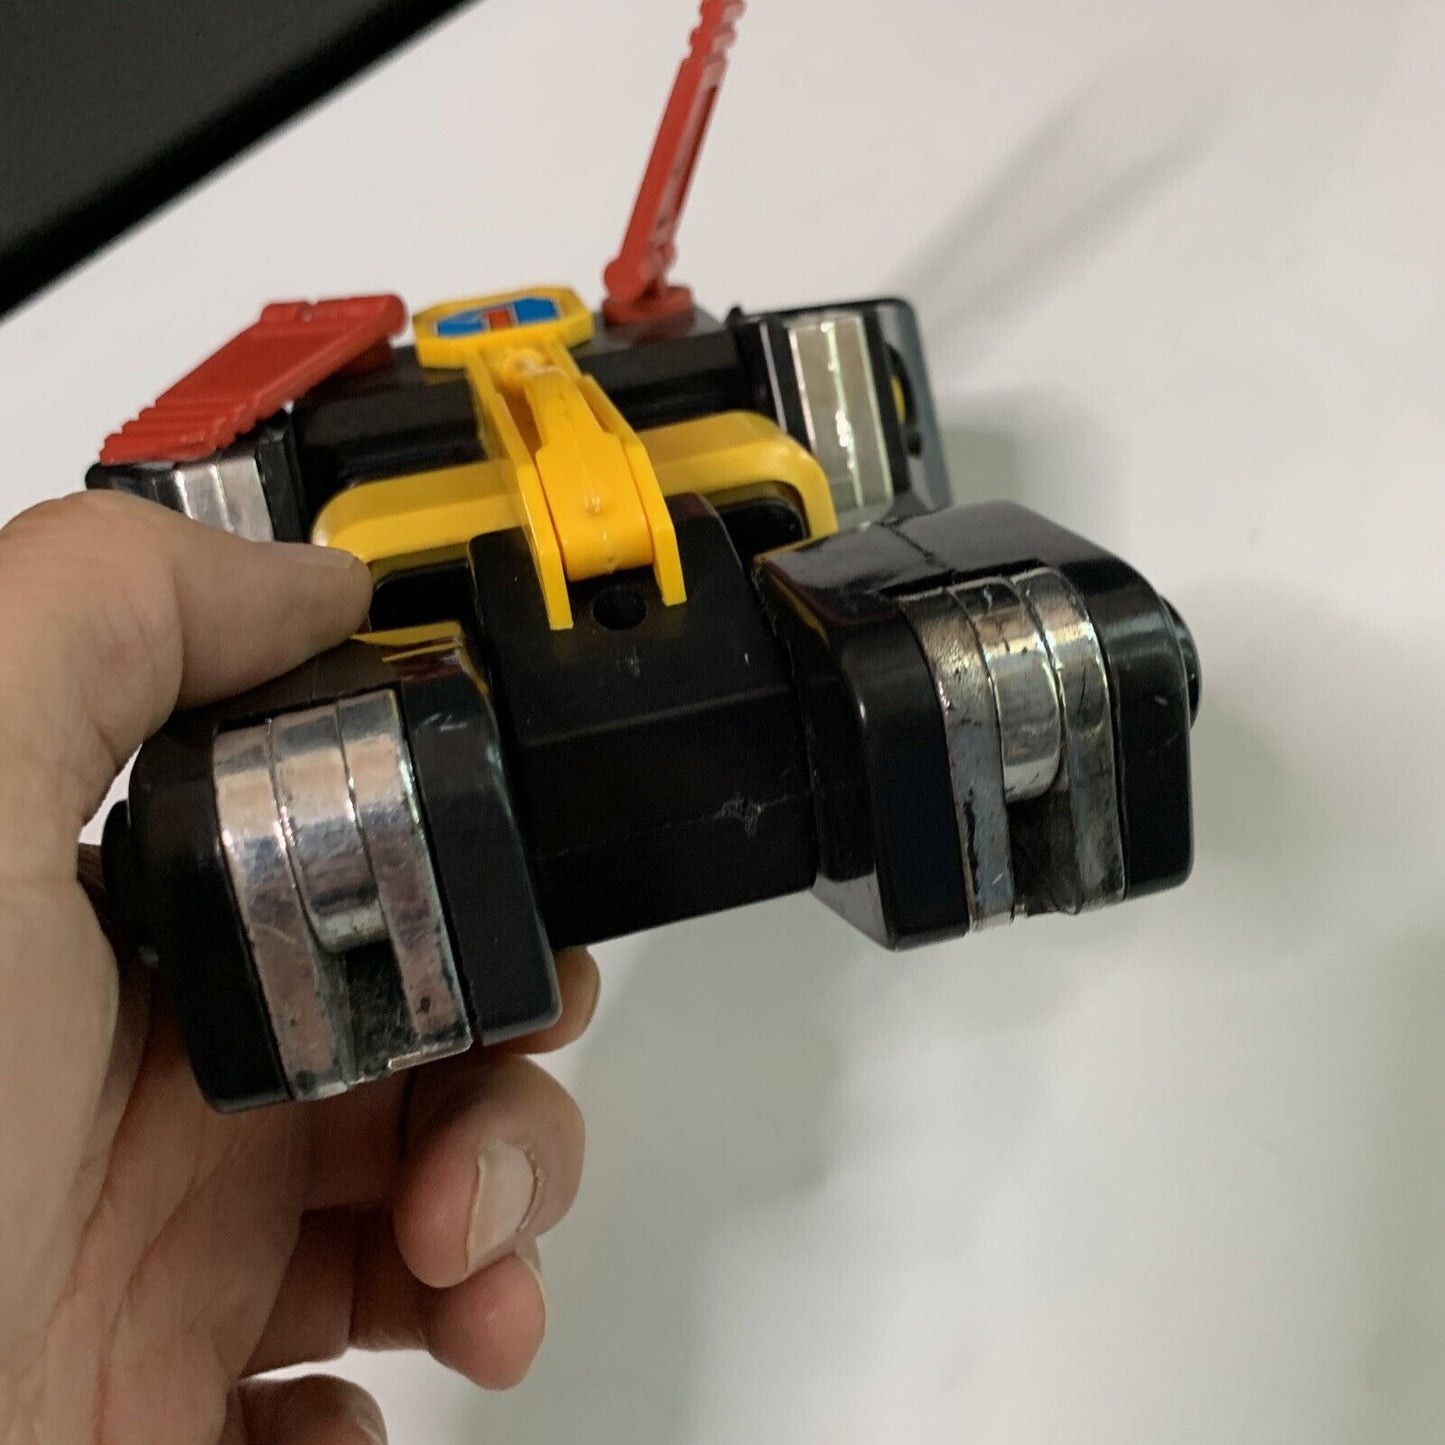 Vintage Voltron Toy - Body only